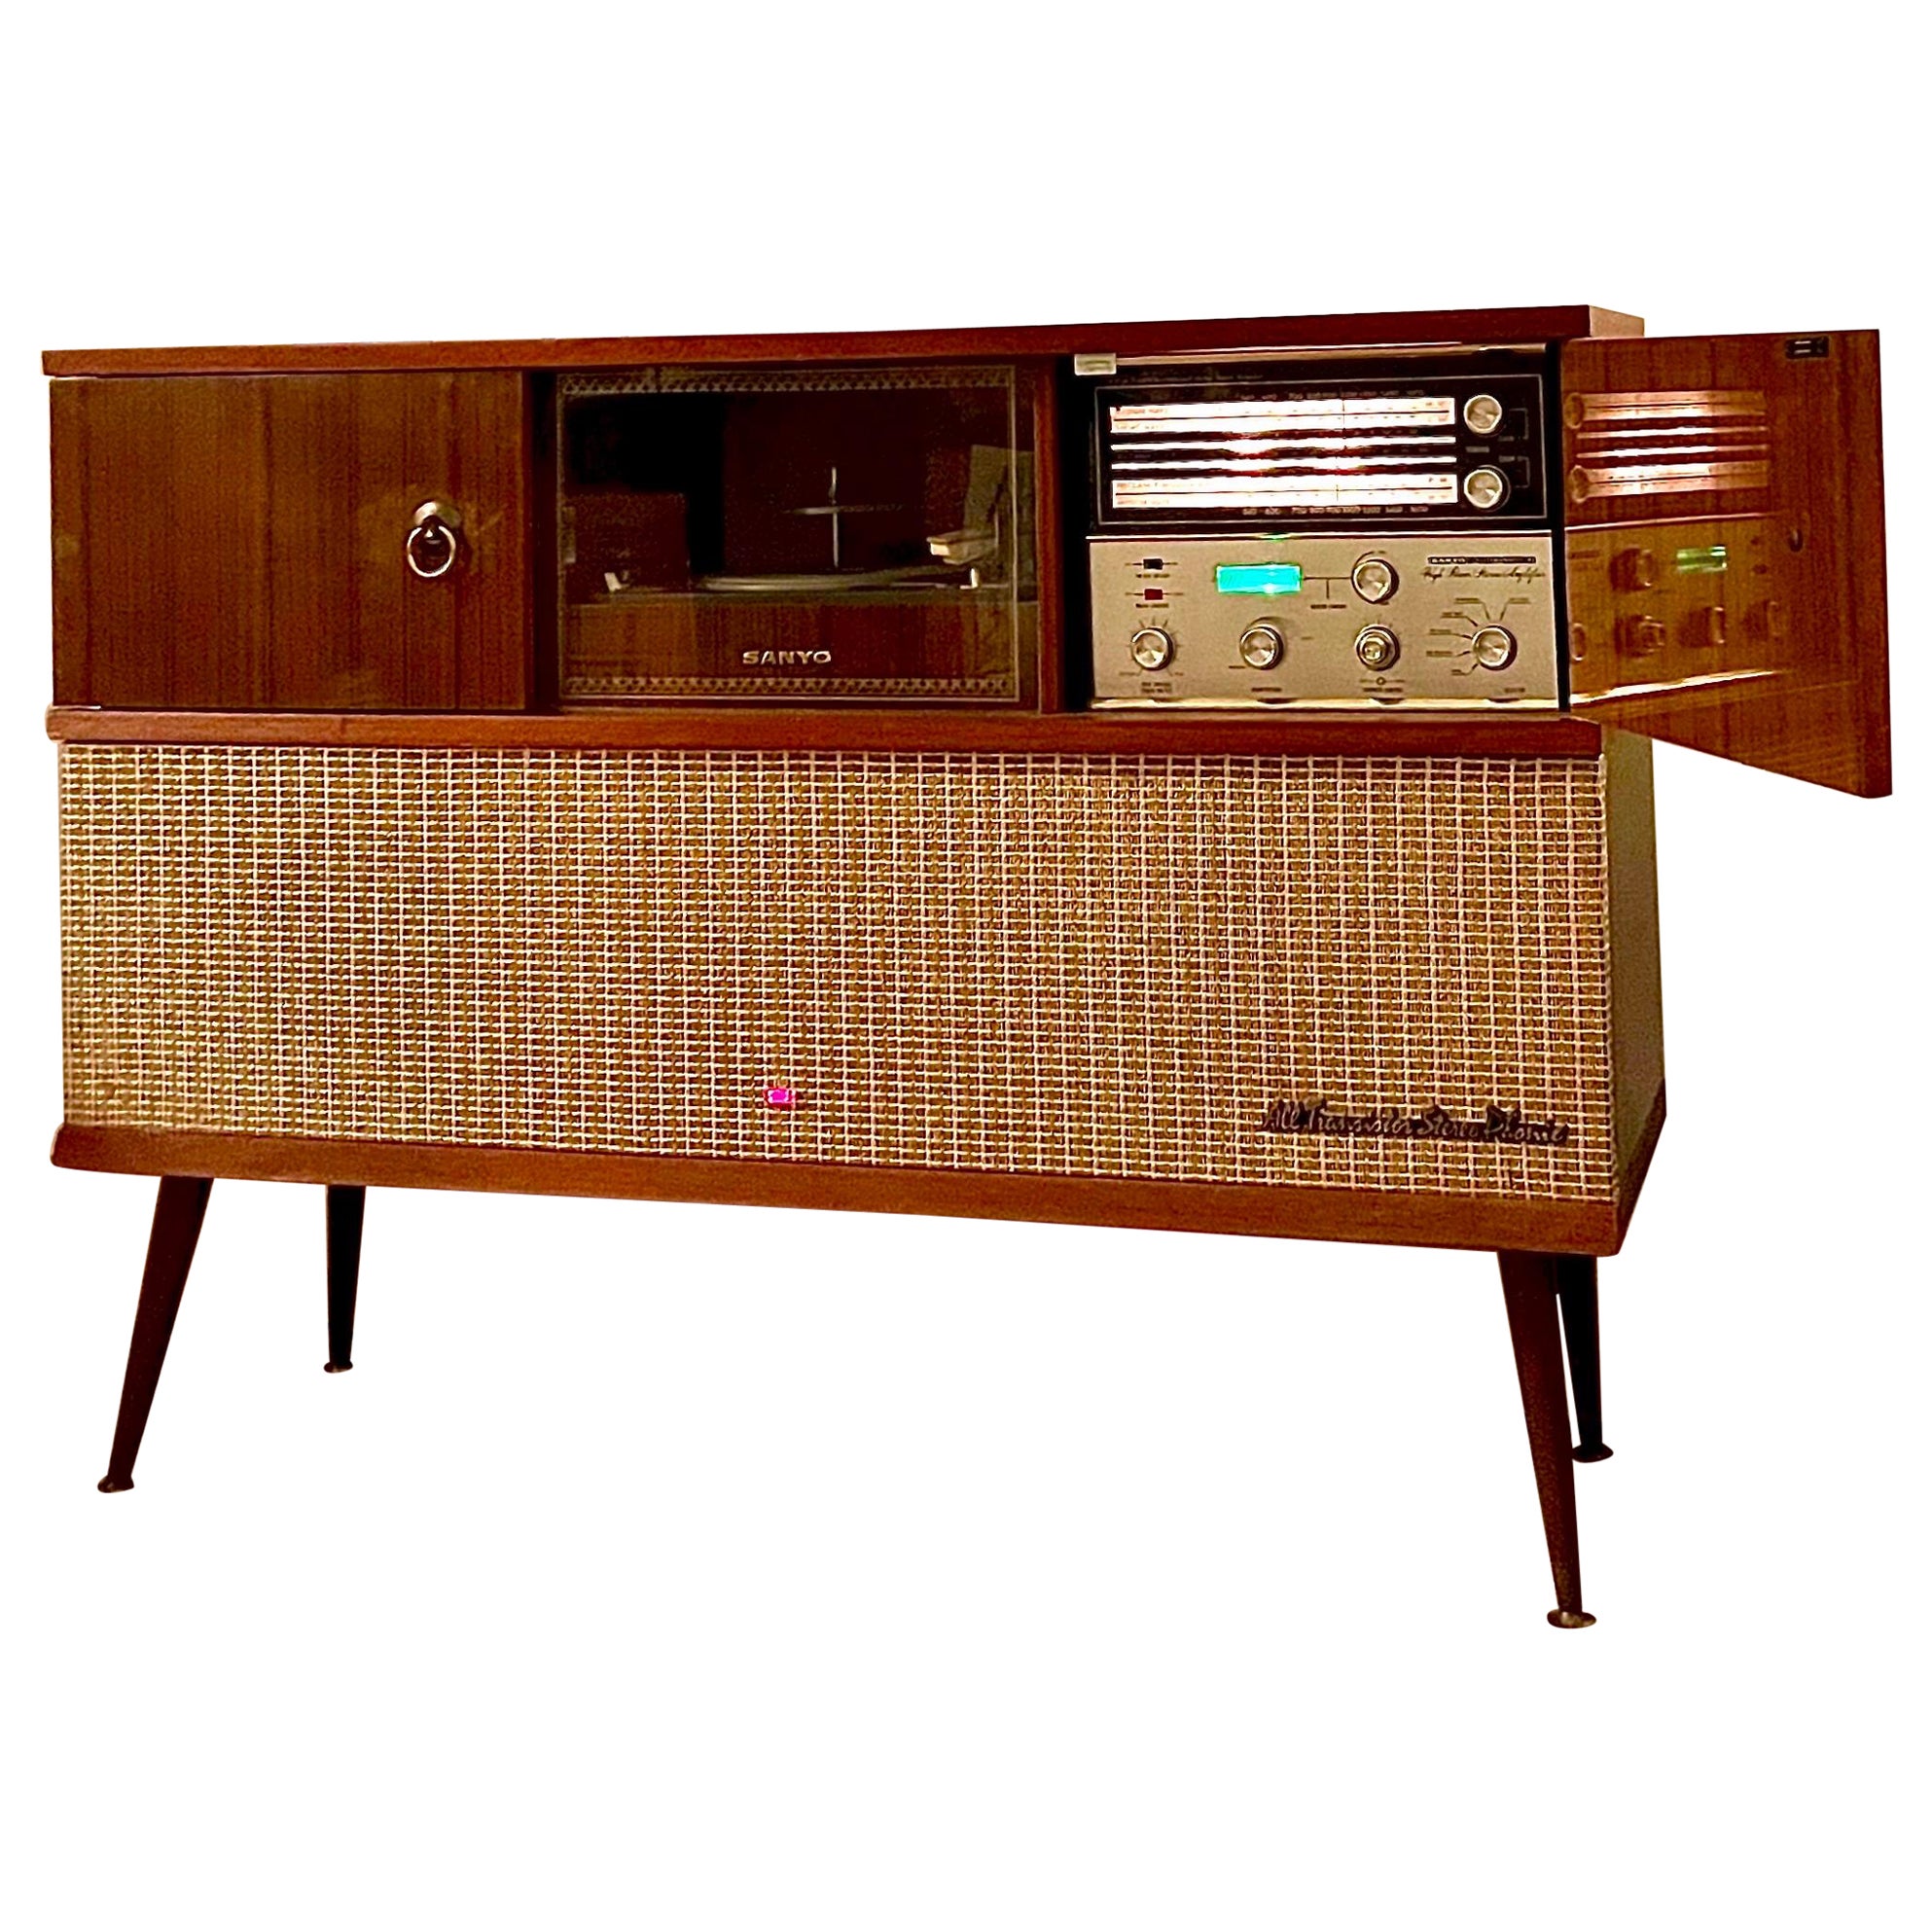 Gws239 Mid-Century Modern Stereo Console Cabinet Record Player Refurbished